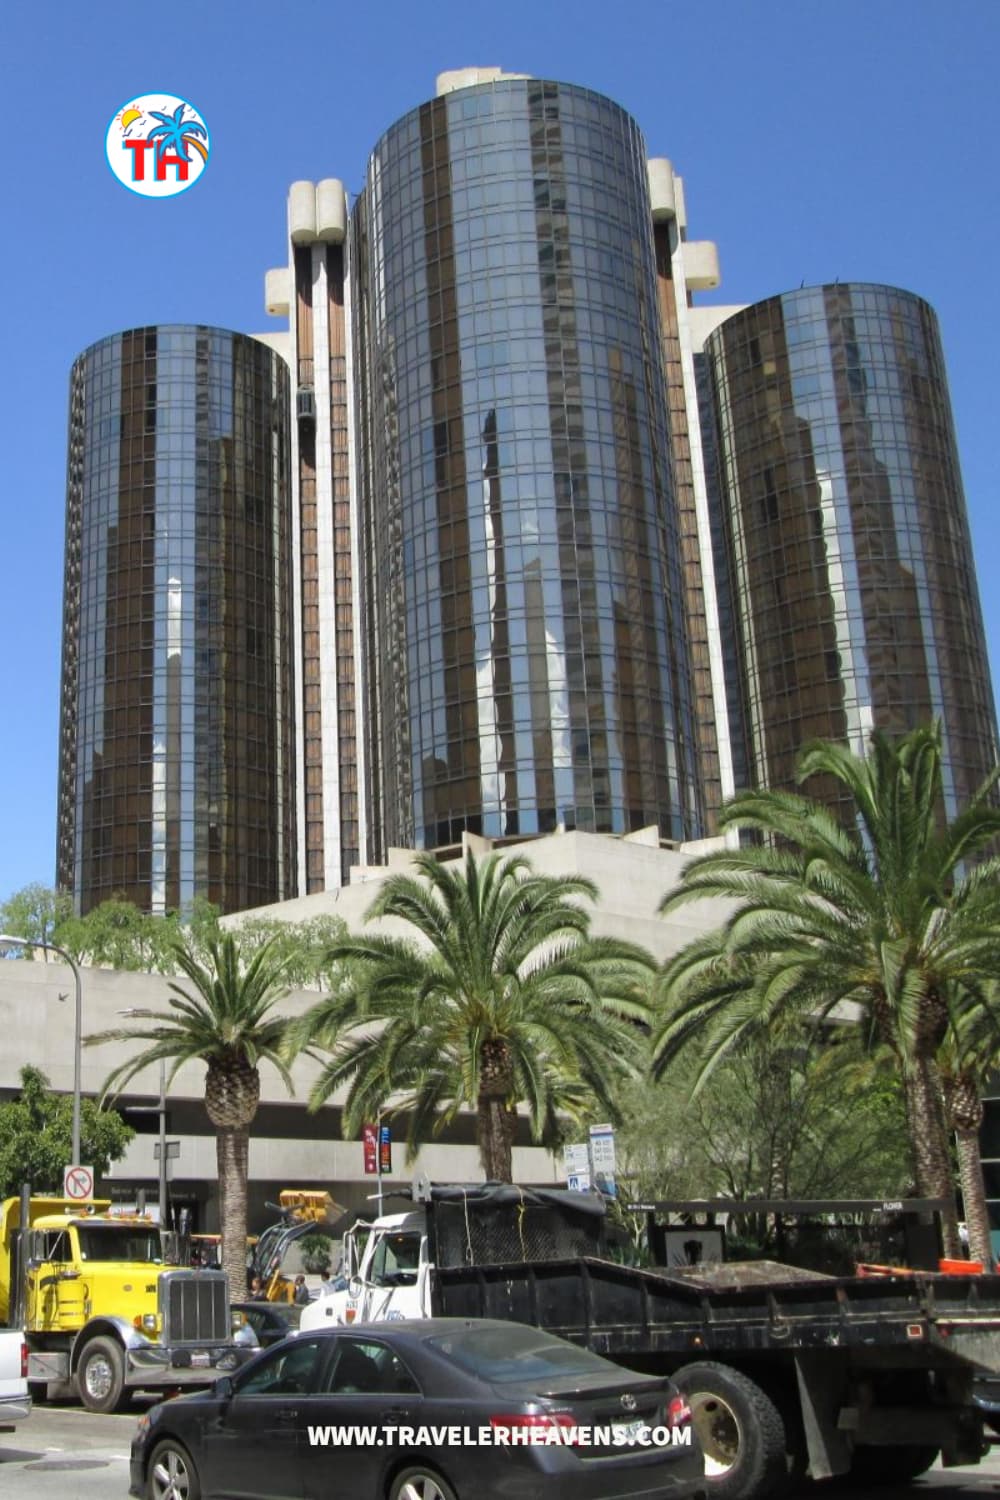 hotels near Philippine consulate Los Angeles, Los Angeles, Los Angeles Travel Guide, Travel to USA, Visit Los Angeles